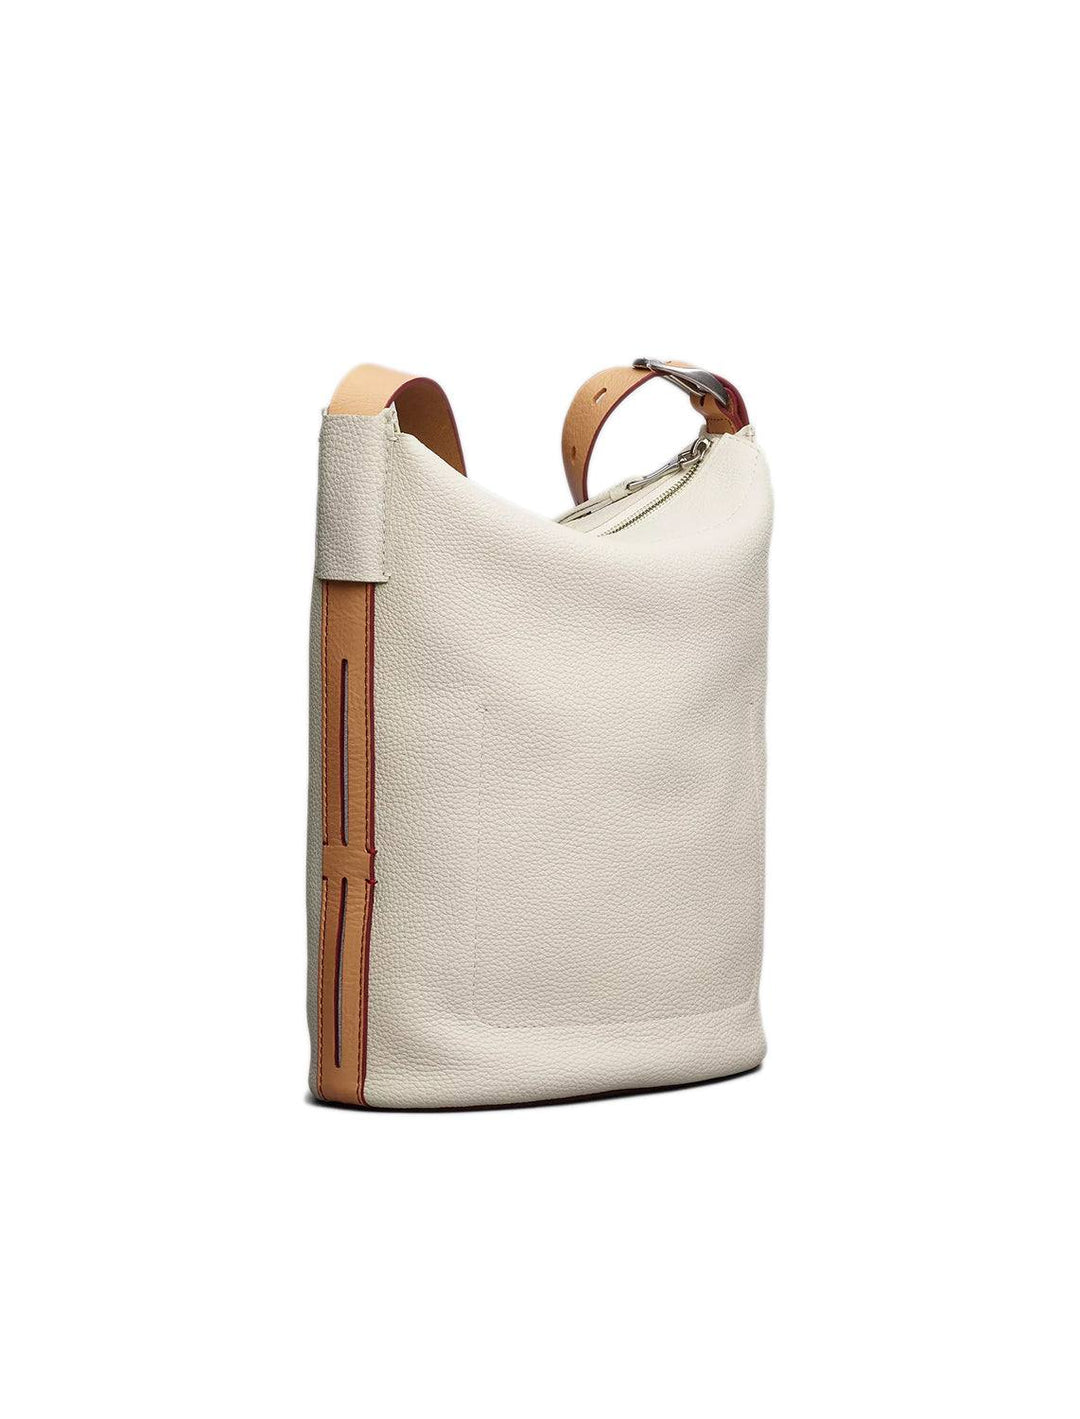 Side angle view of Rag & Bone's belize bag in antique white.